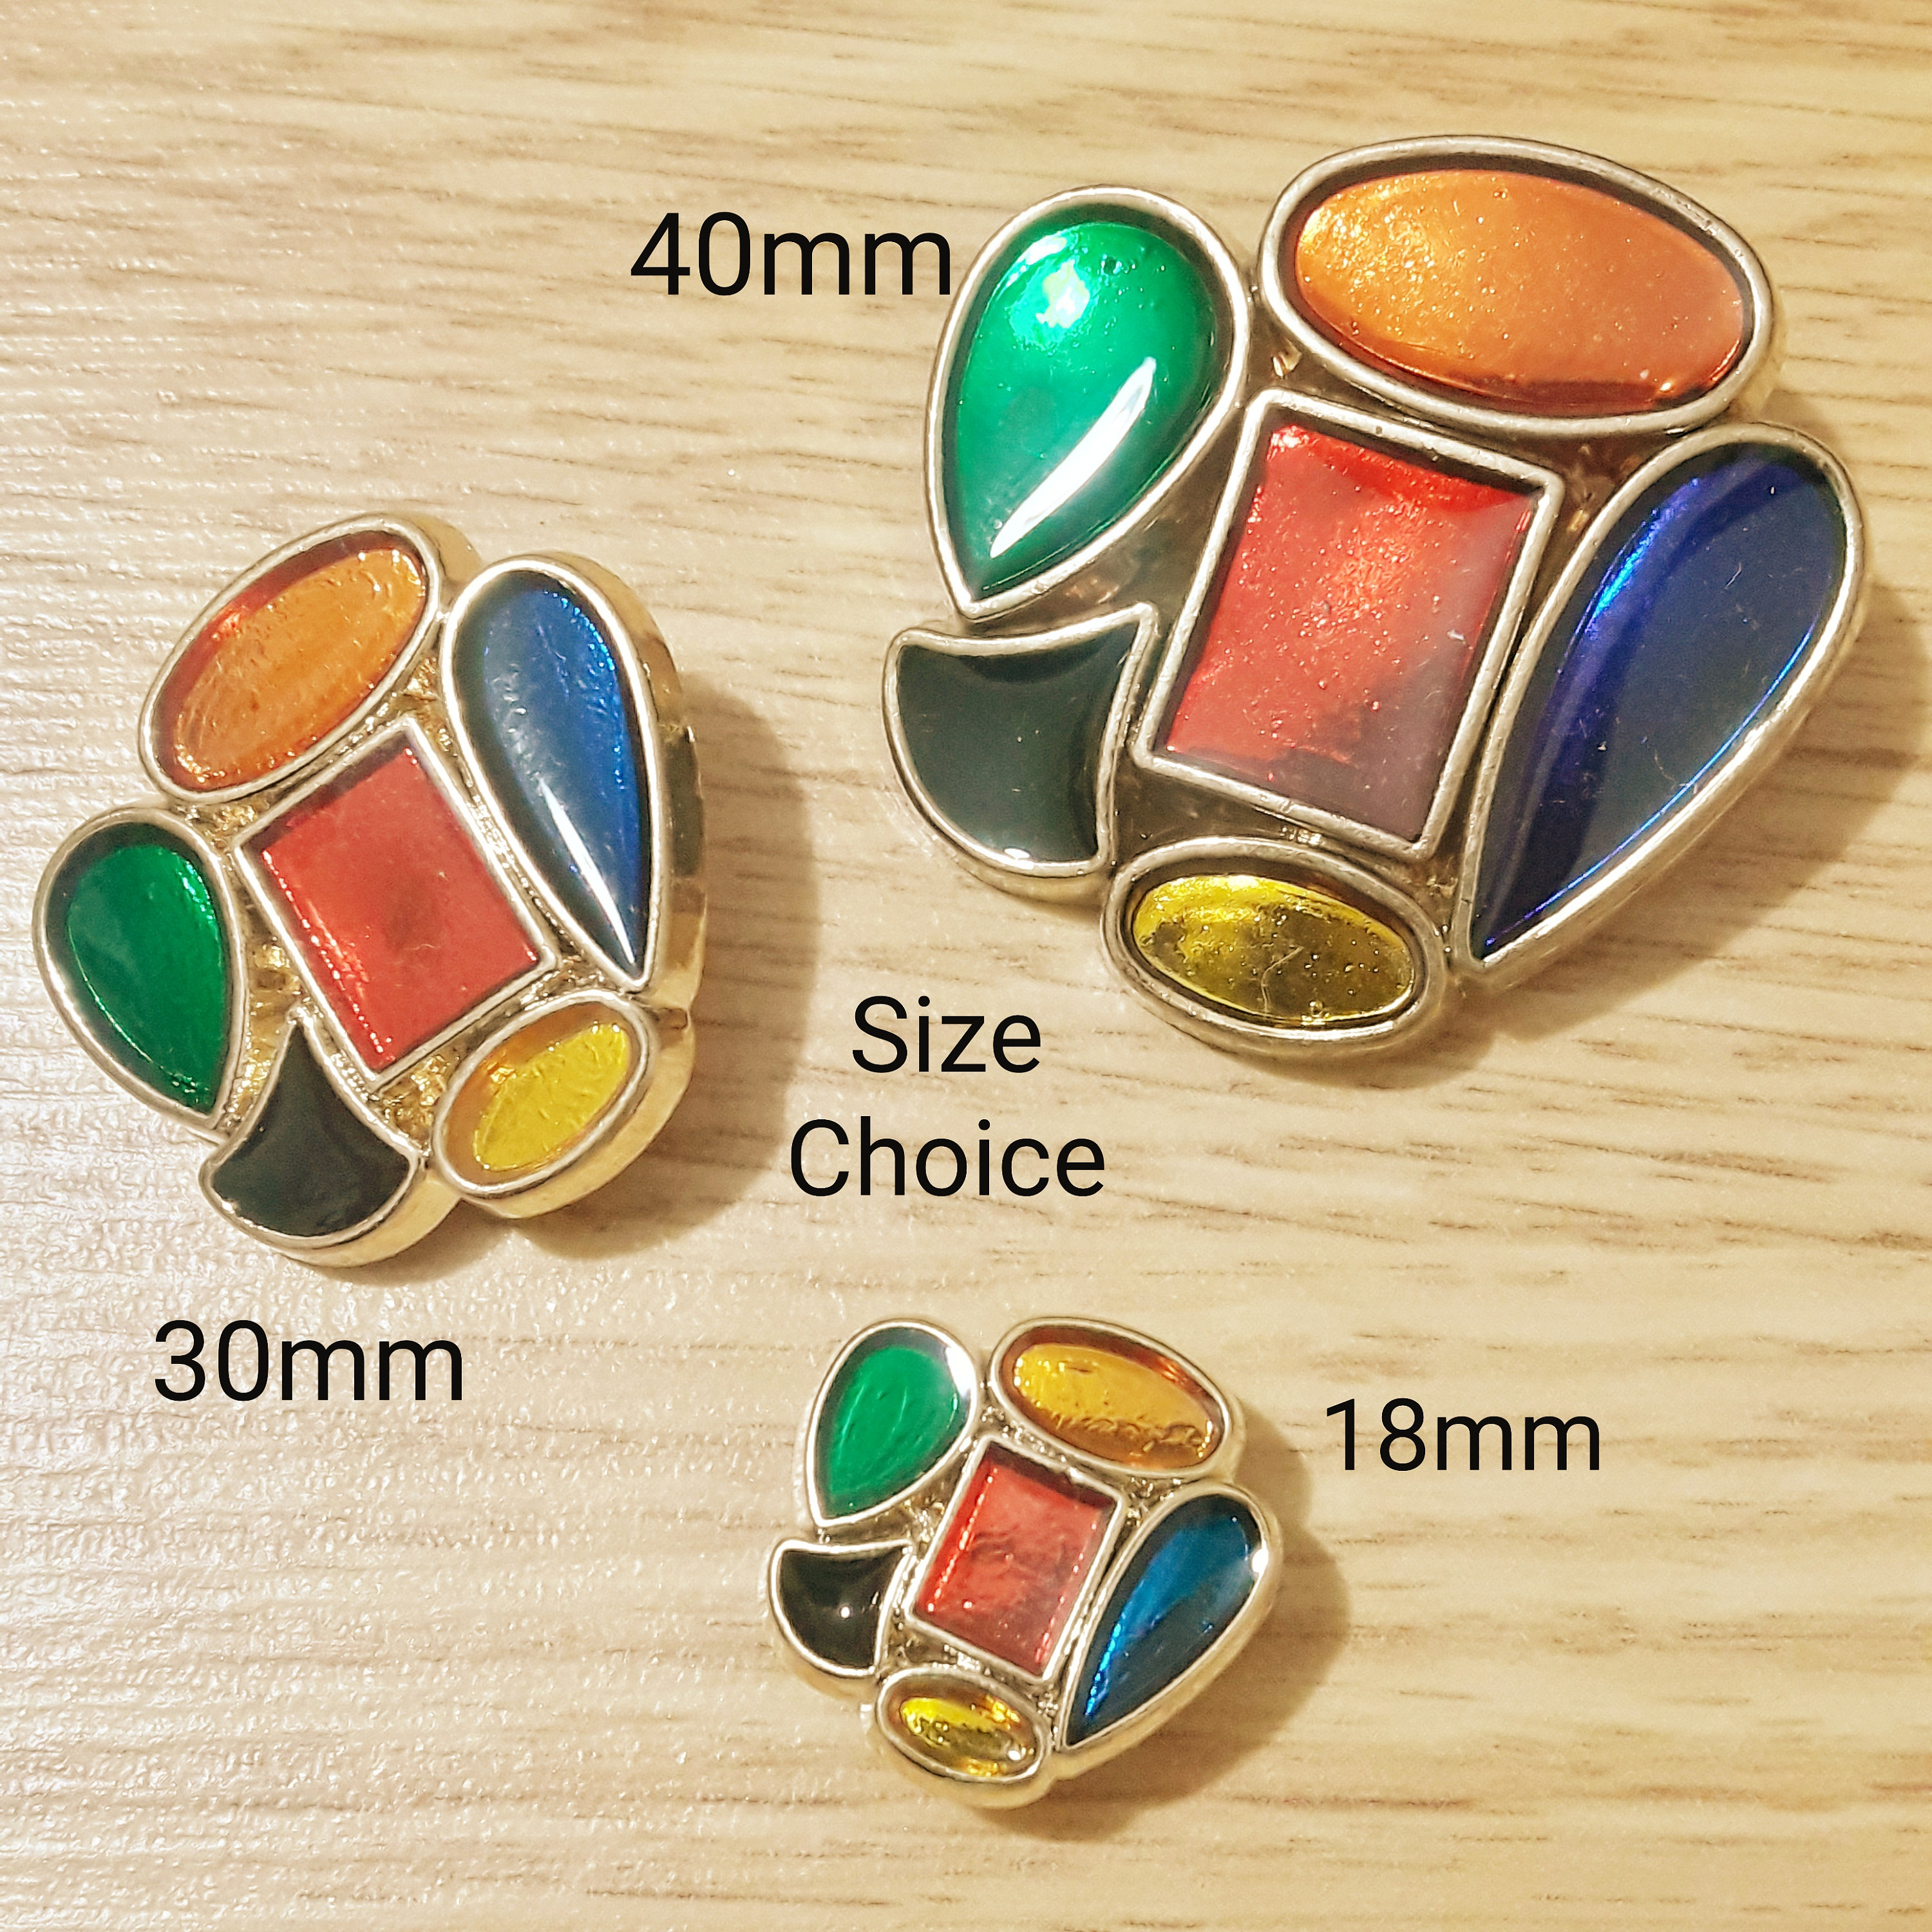 Glowing Enamel Fancy Buttons-colour CHOICE 18 Mm Silver With 